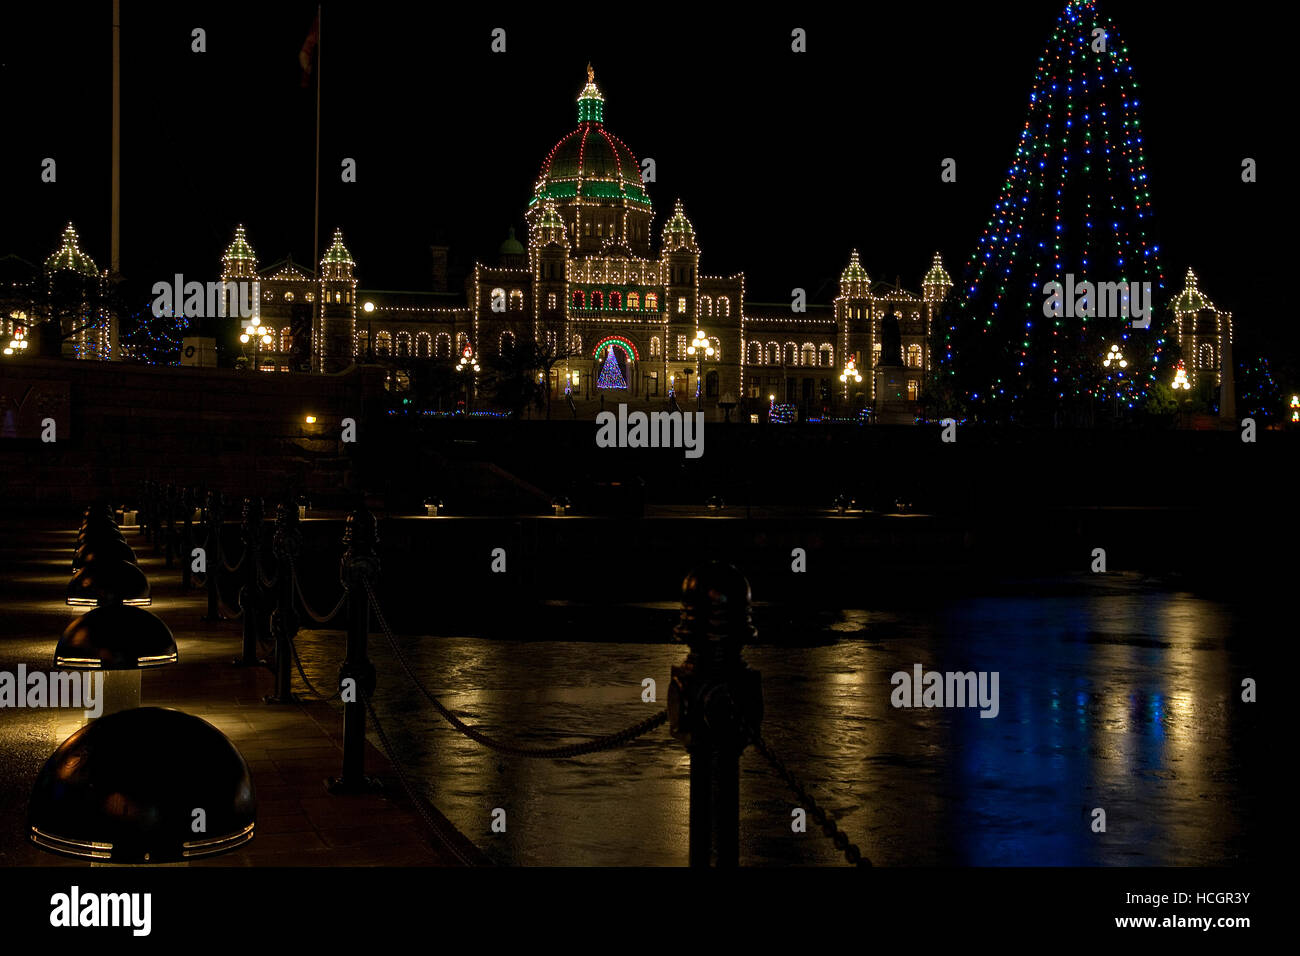 British Columbia parliament buildings in Christmas lights. Stock Photo